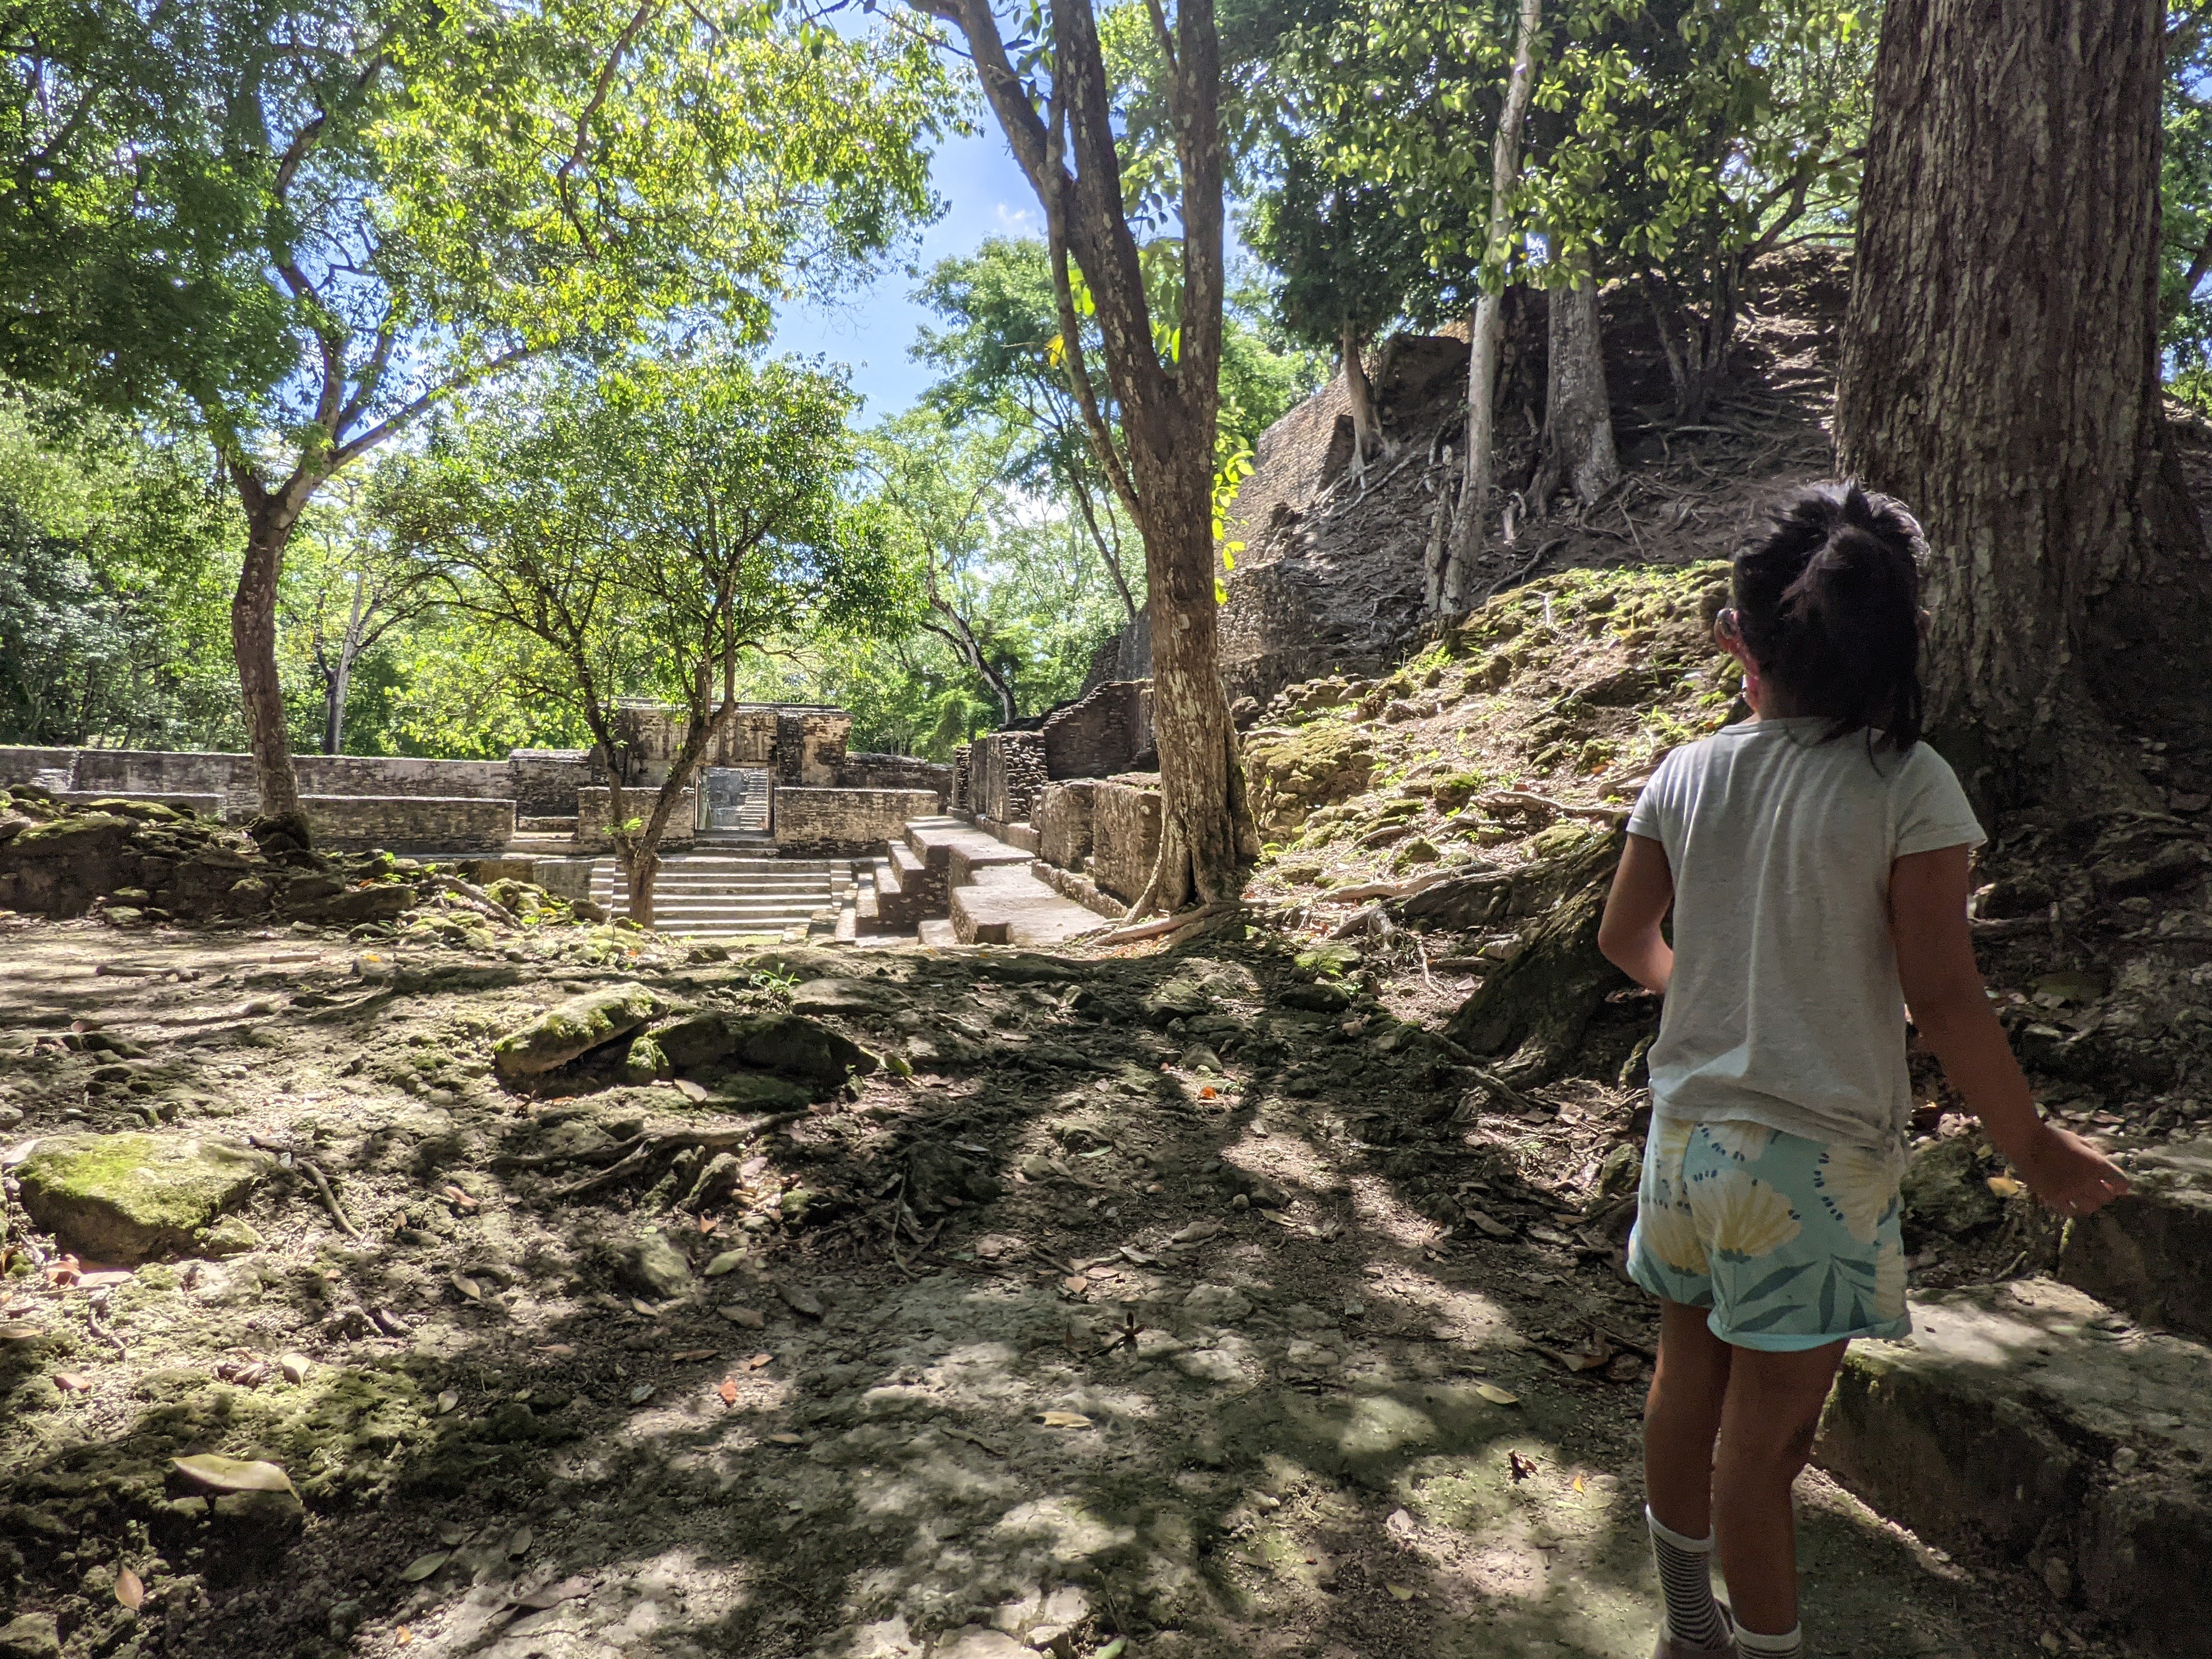 dark haired child in shorts and t-shirt standing infront of maya ruins.